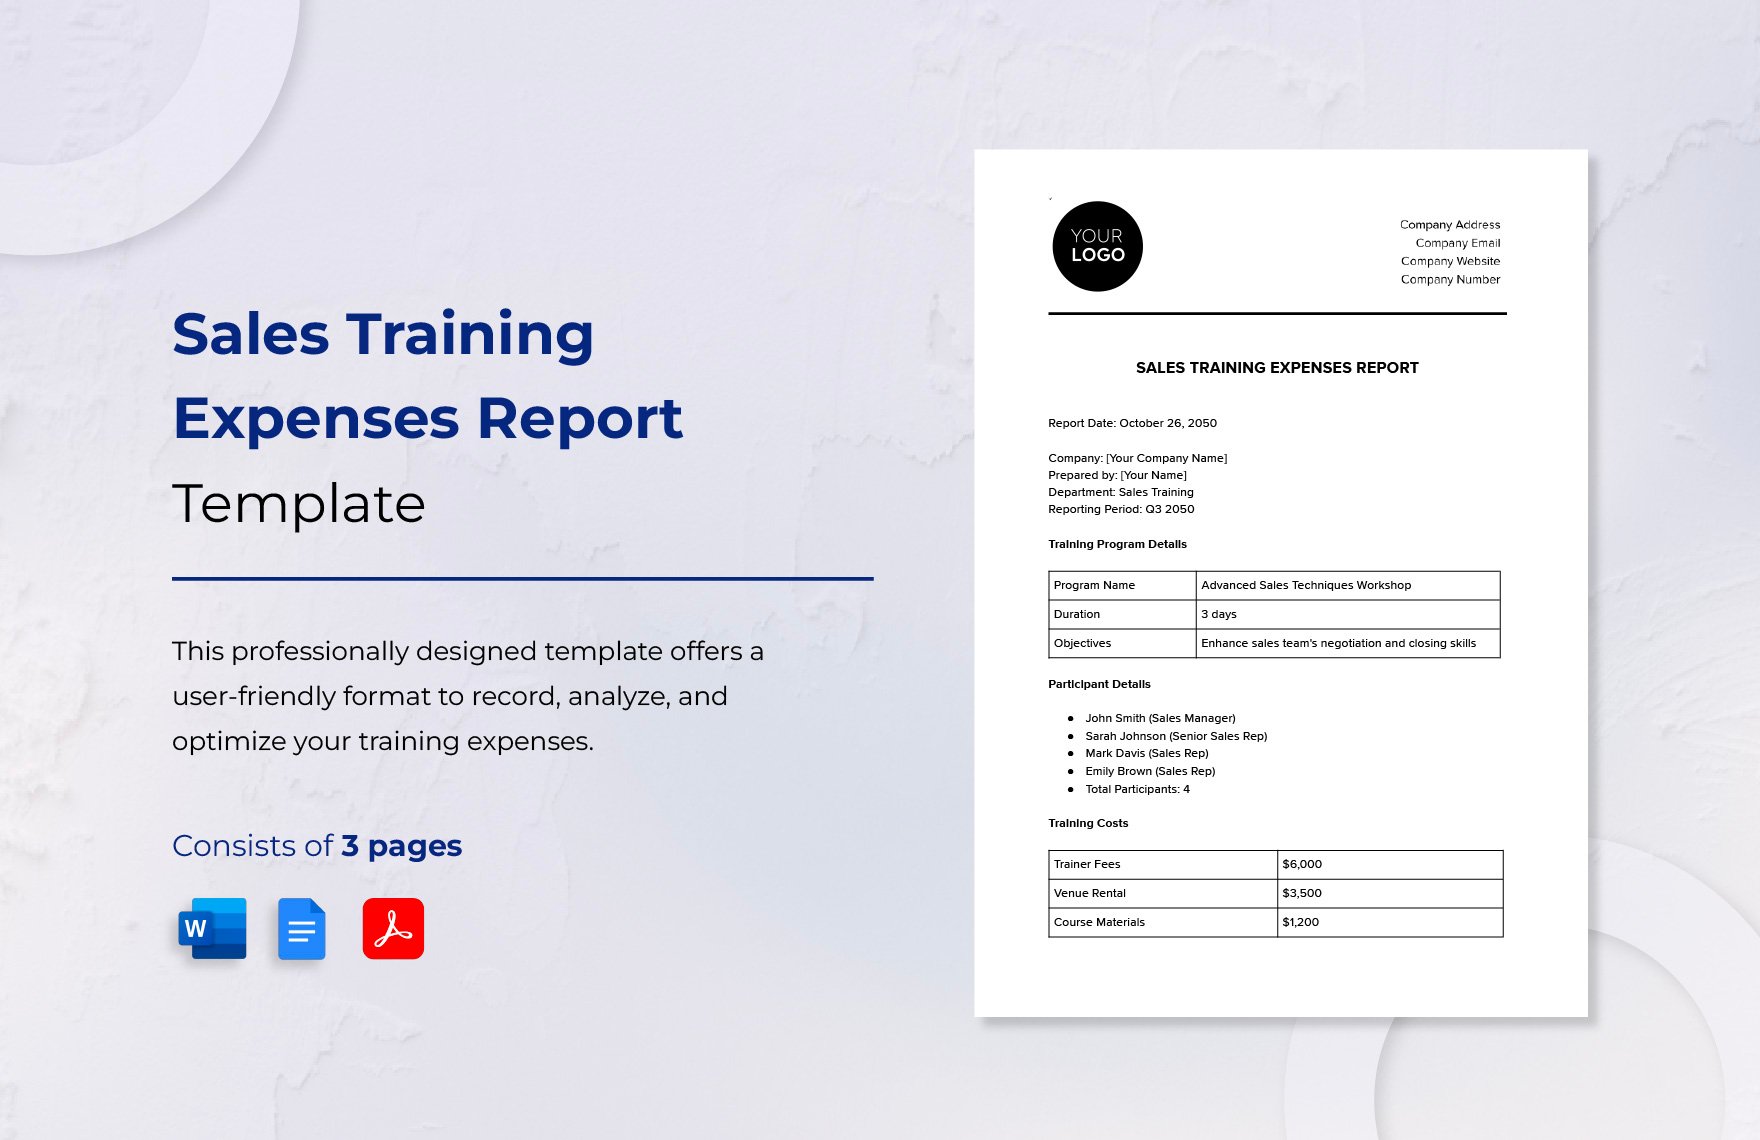 Sales Training Expenses Report Template